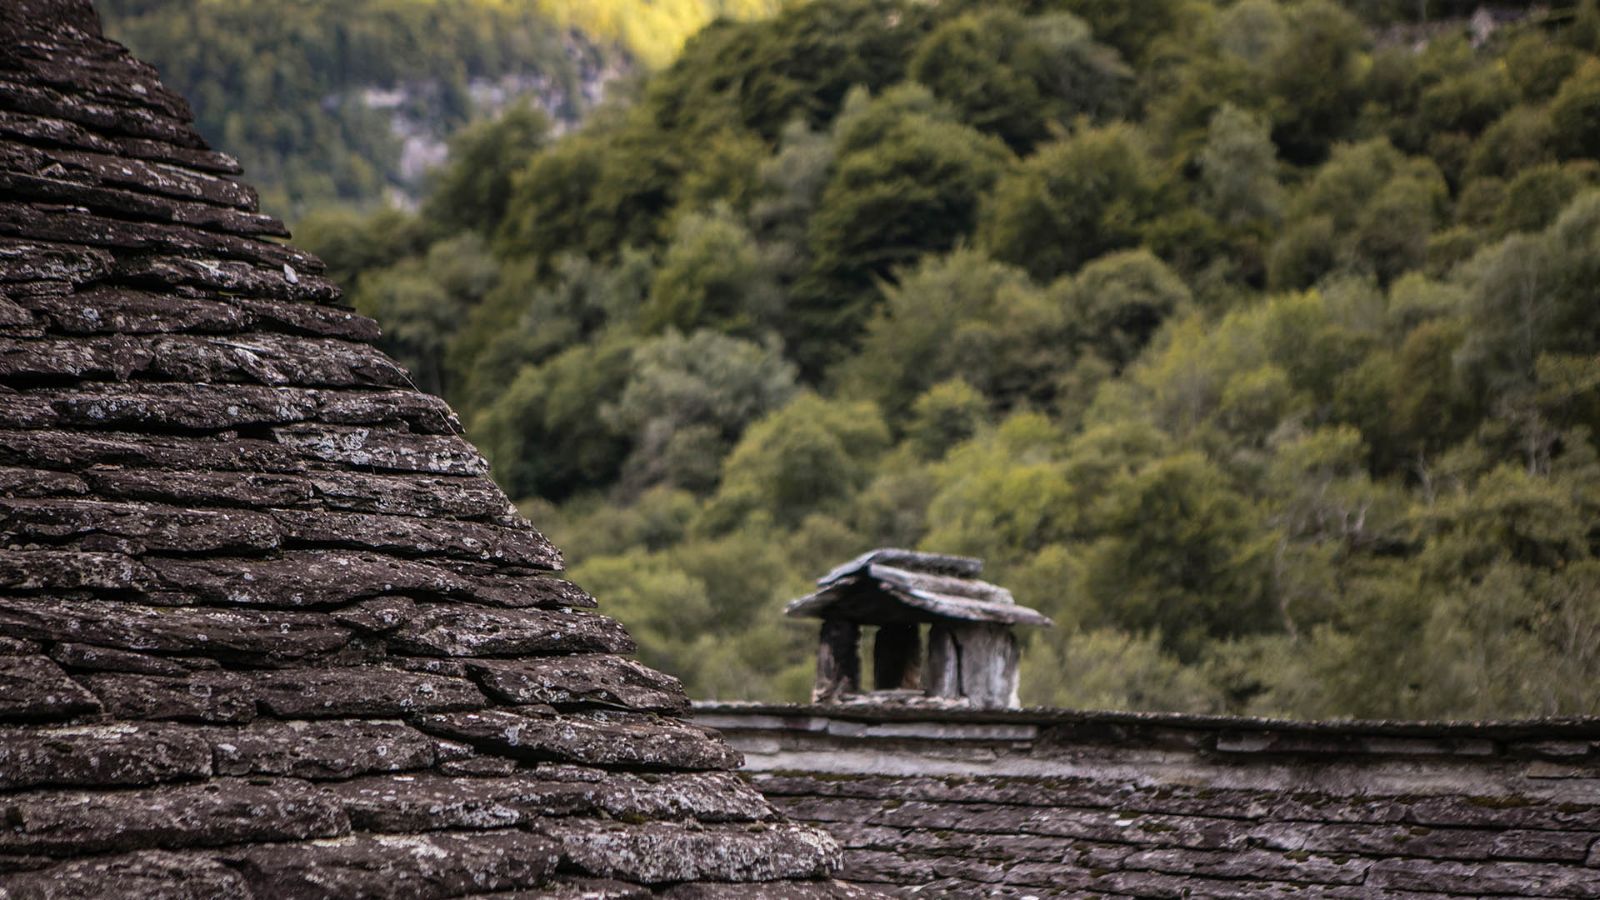 Bavona Valley, stone made roofs